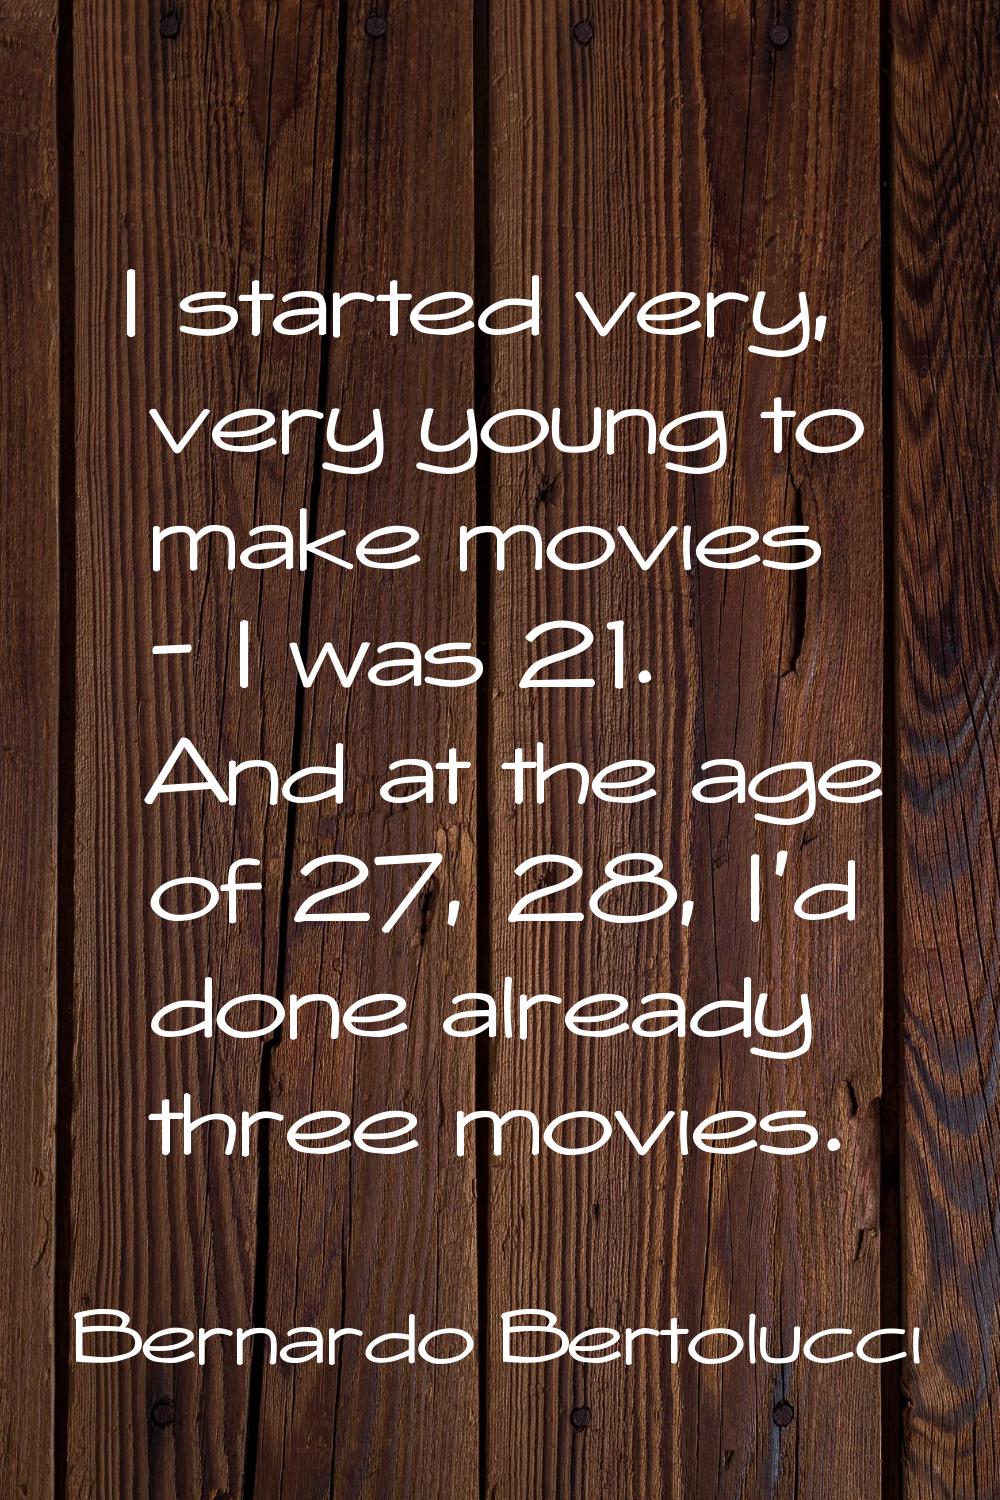 I started very, very young to make movies - I was 21. And at the age of 27, 28, I'd done already th